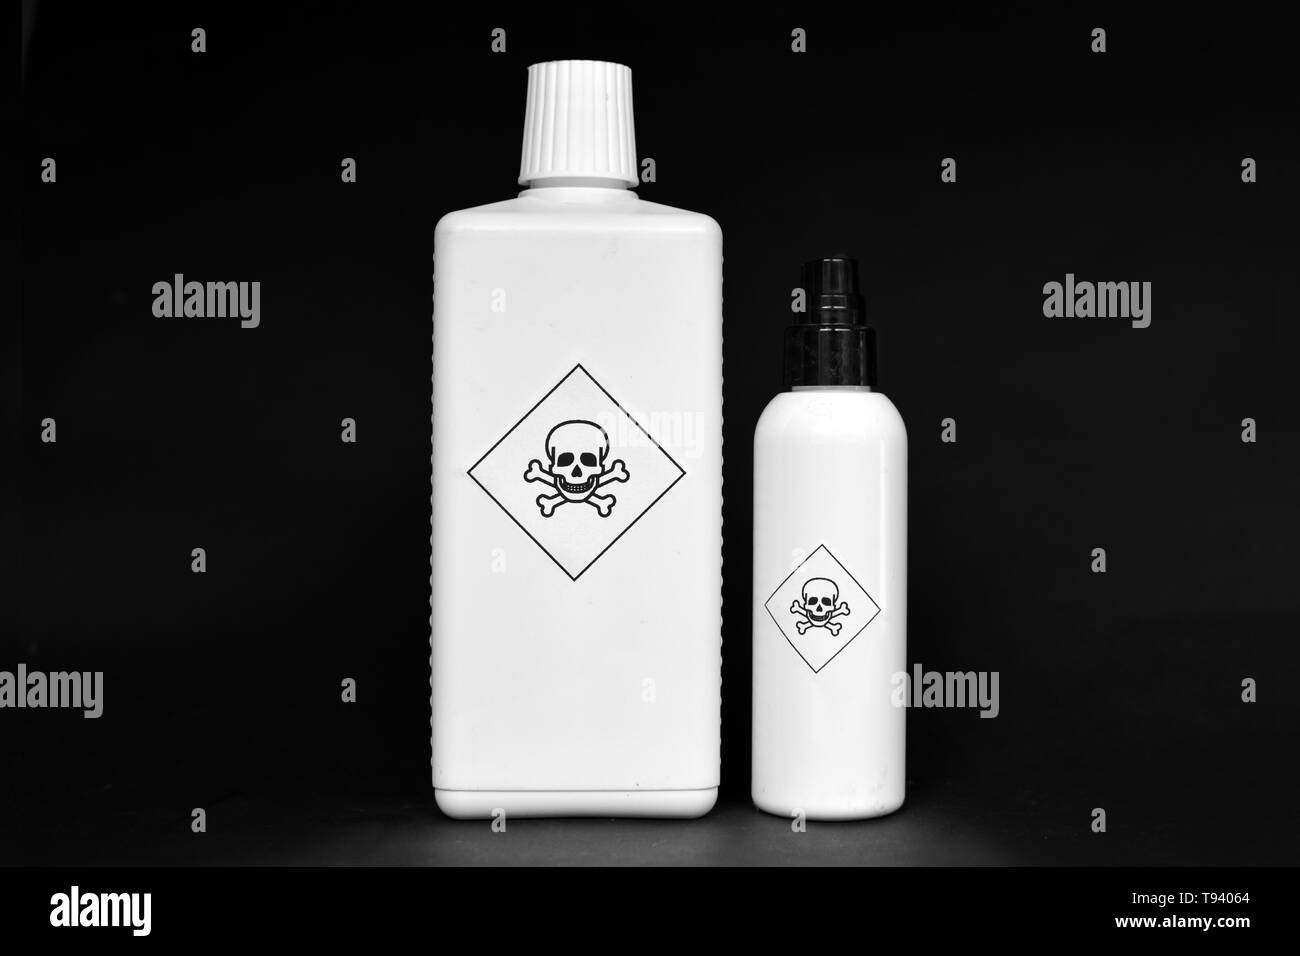 Two white bottles with poison warning signs on them on black background Stock Photo